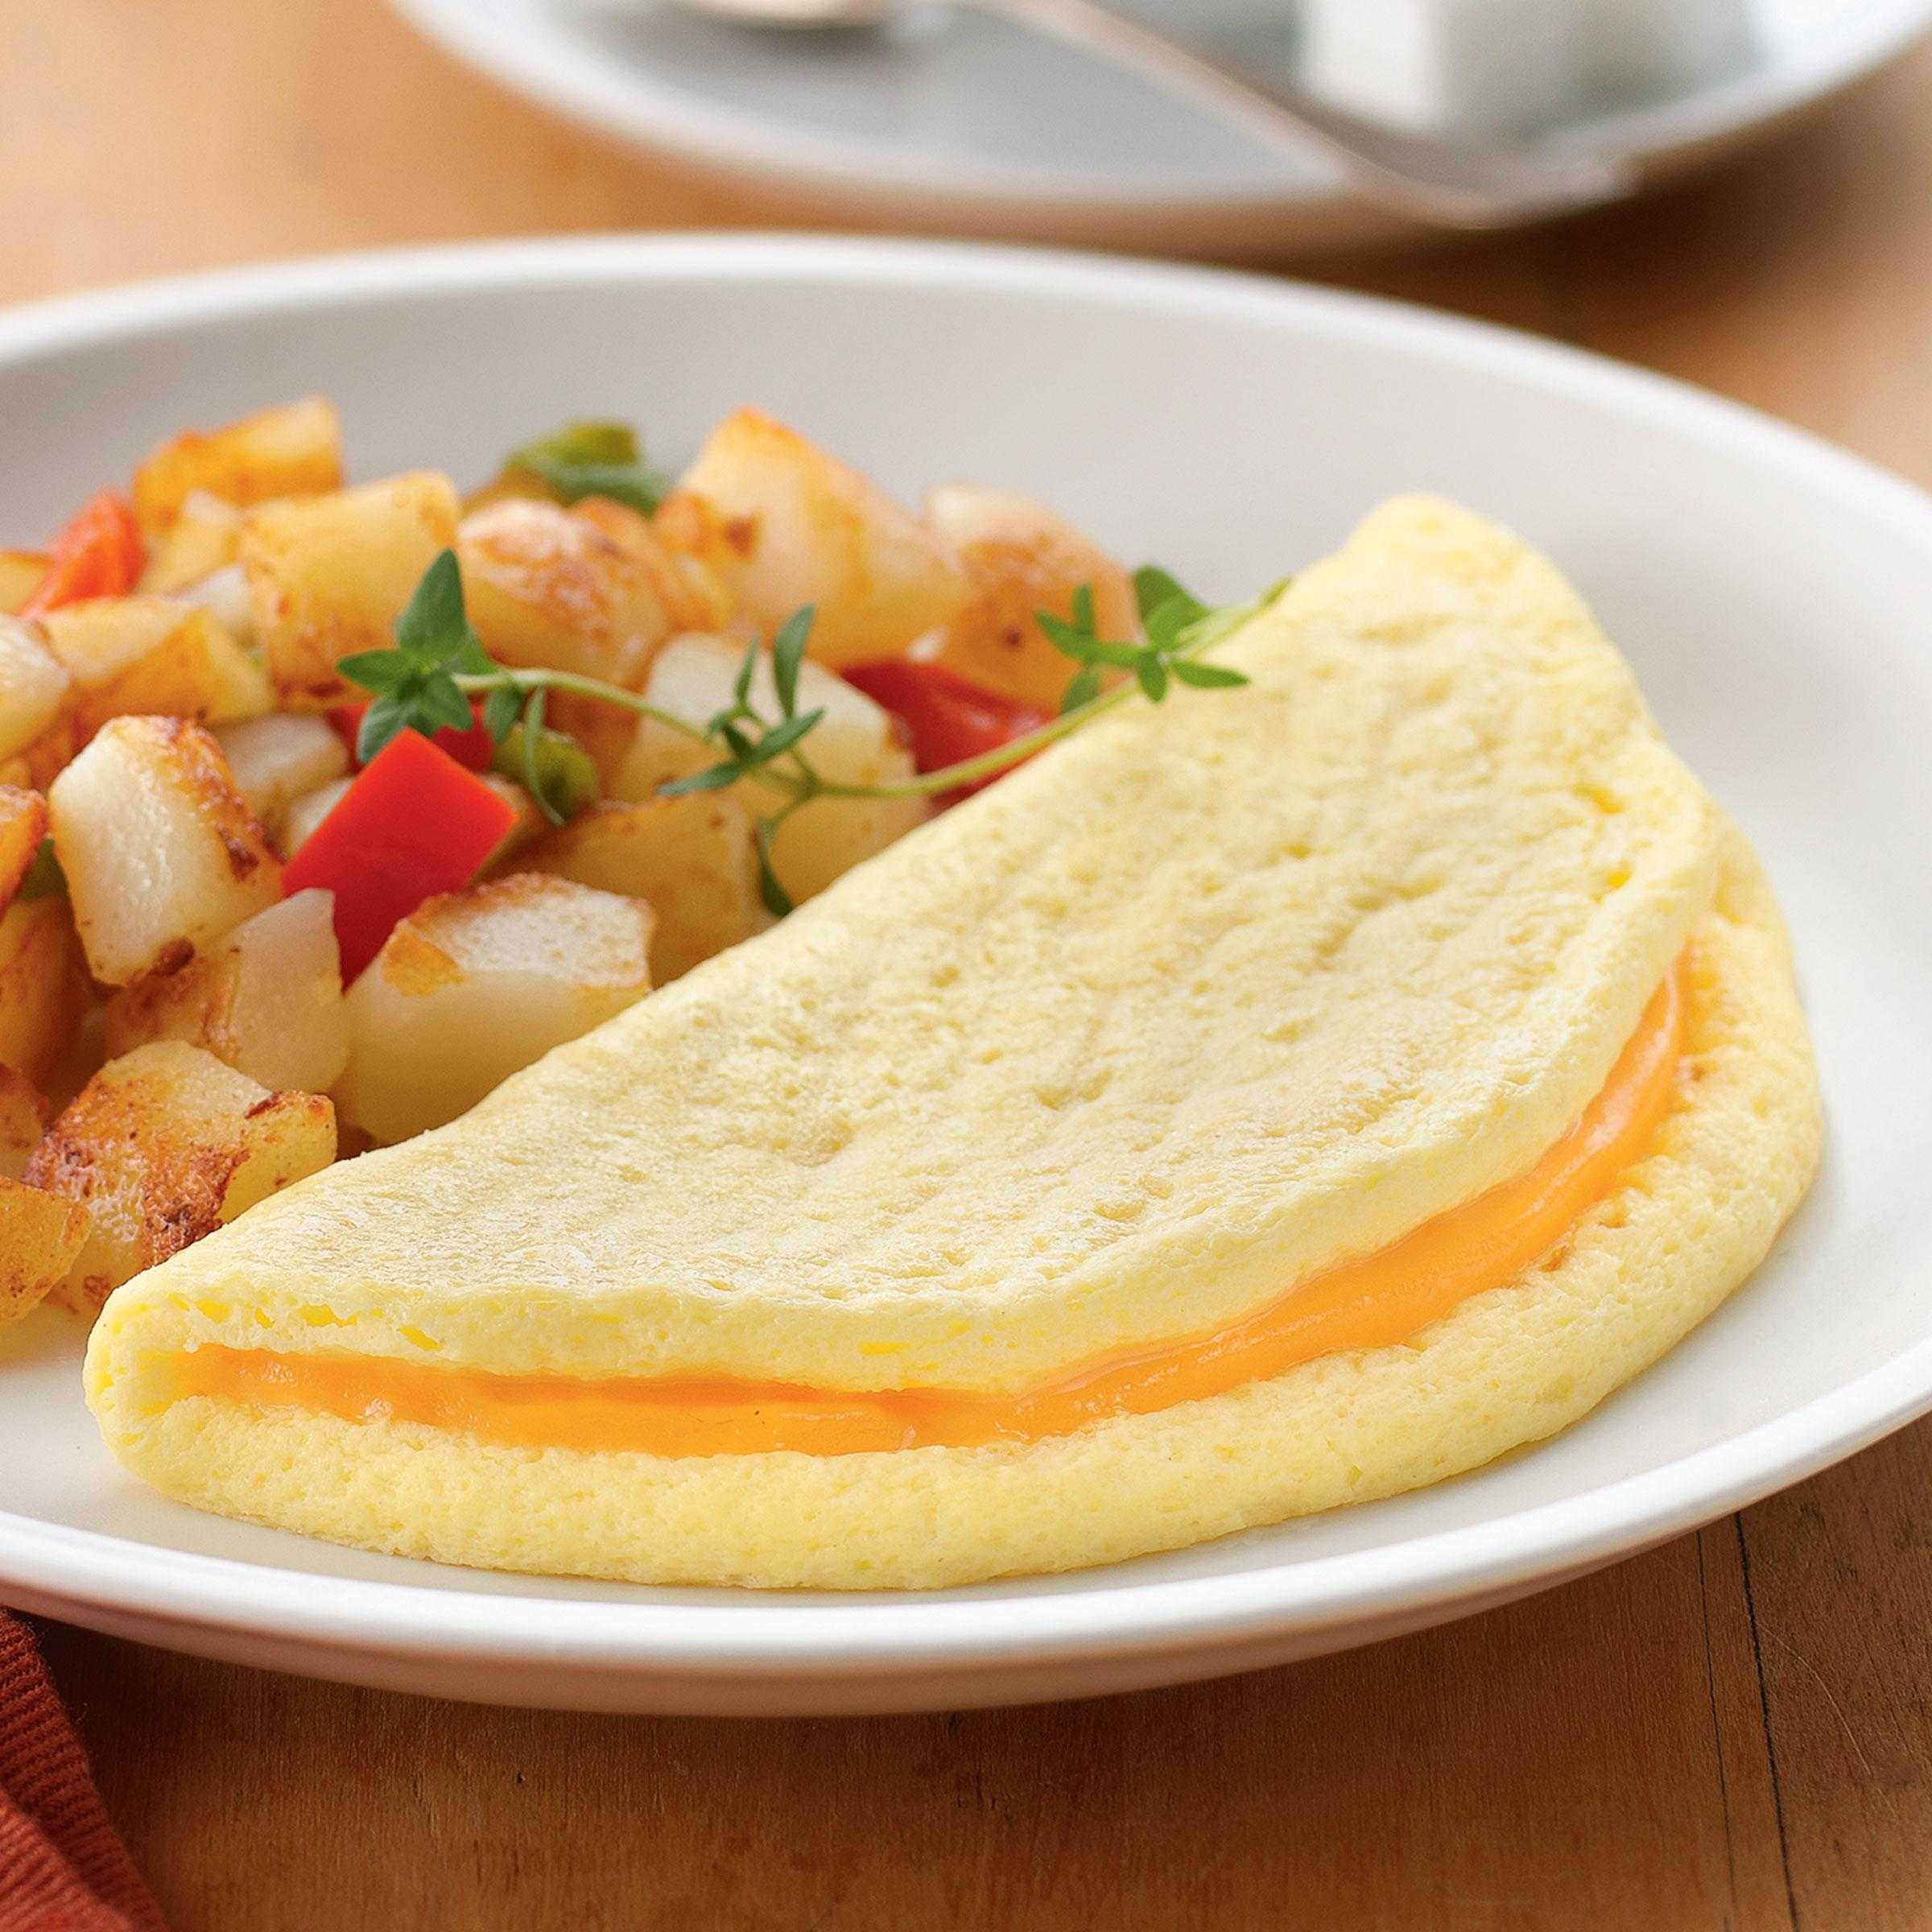 Papetti’s® Fully-Cooked 5″ x 2.25″ Singlefold Omelet Filled with Cheddar Cheese, CN, 144/2.0 oz